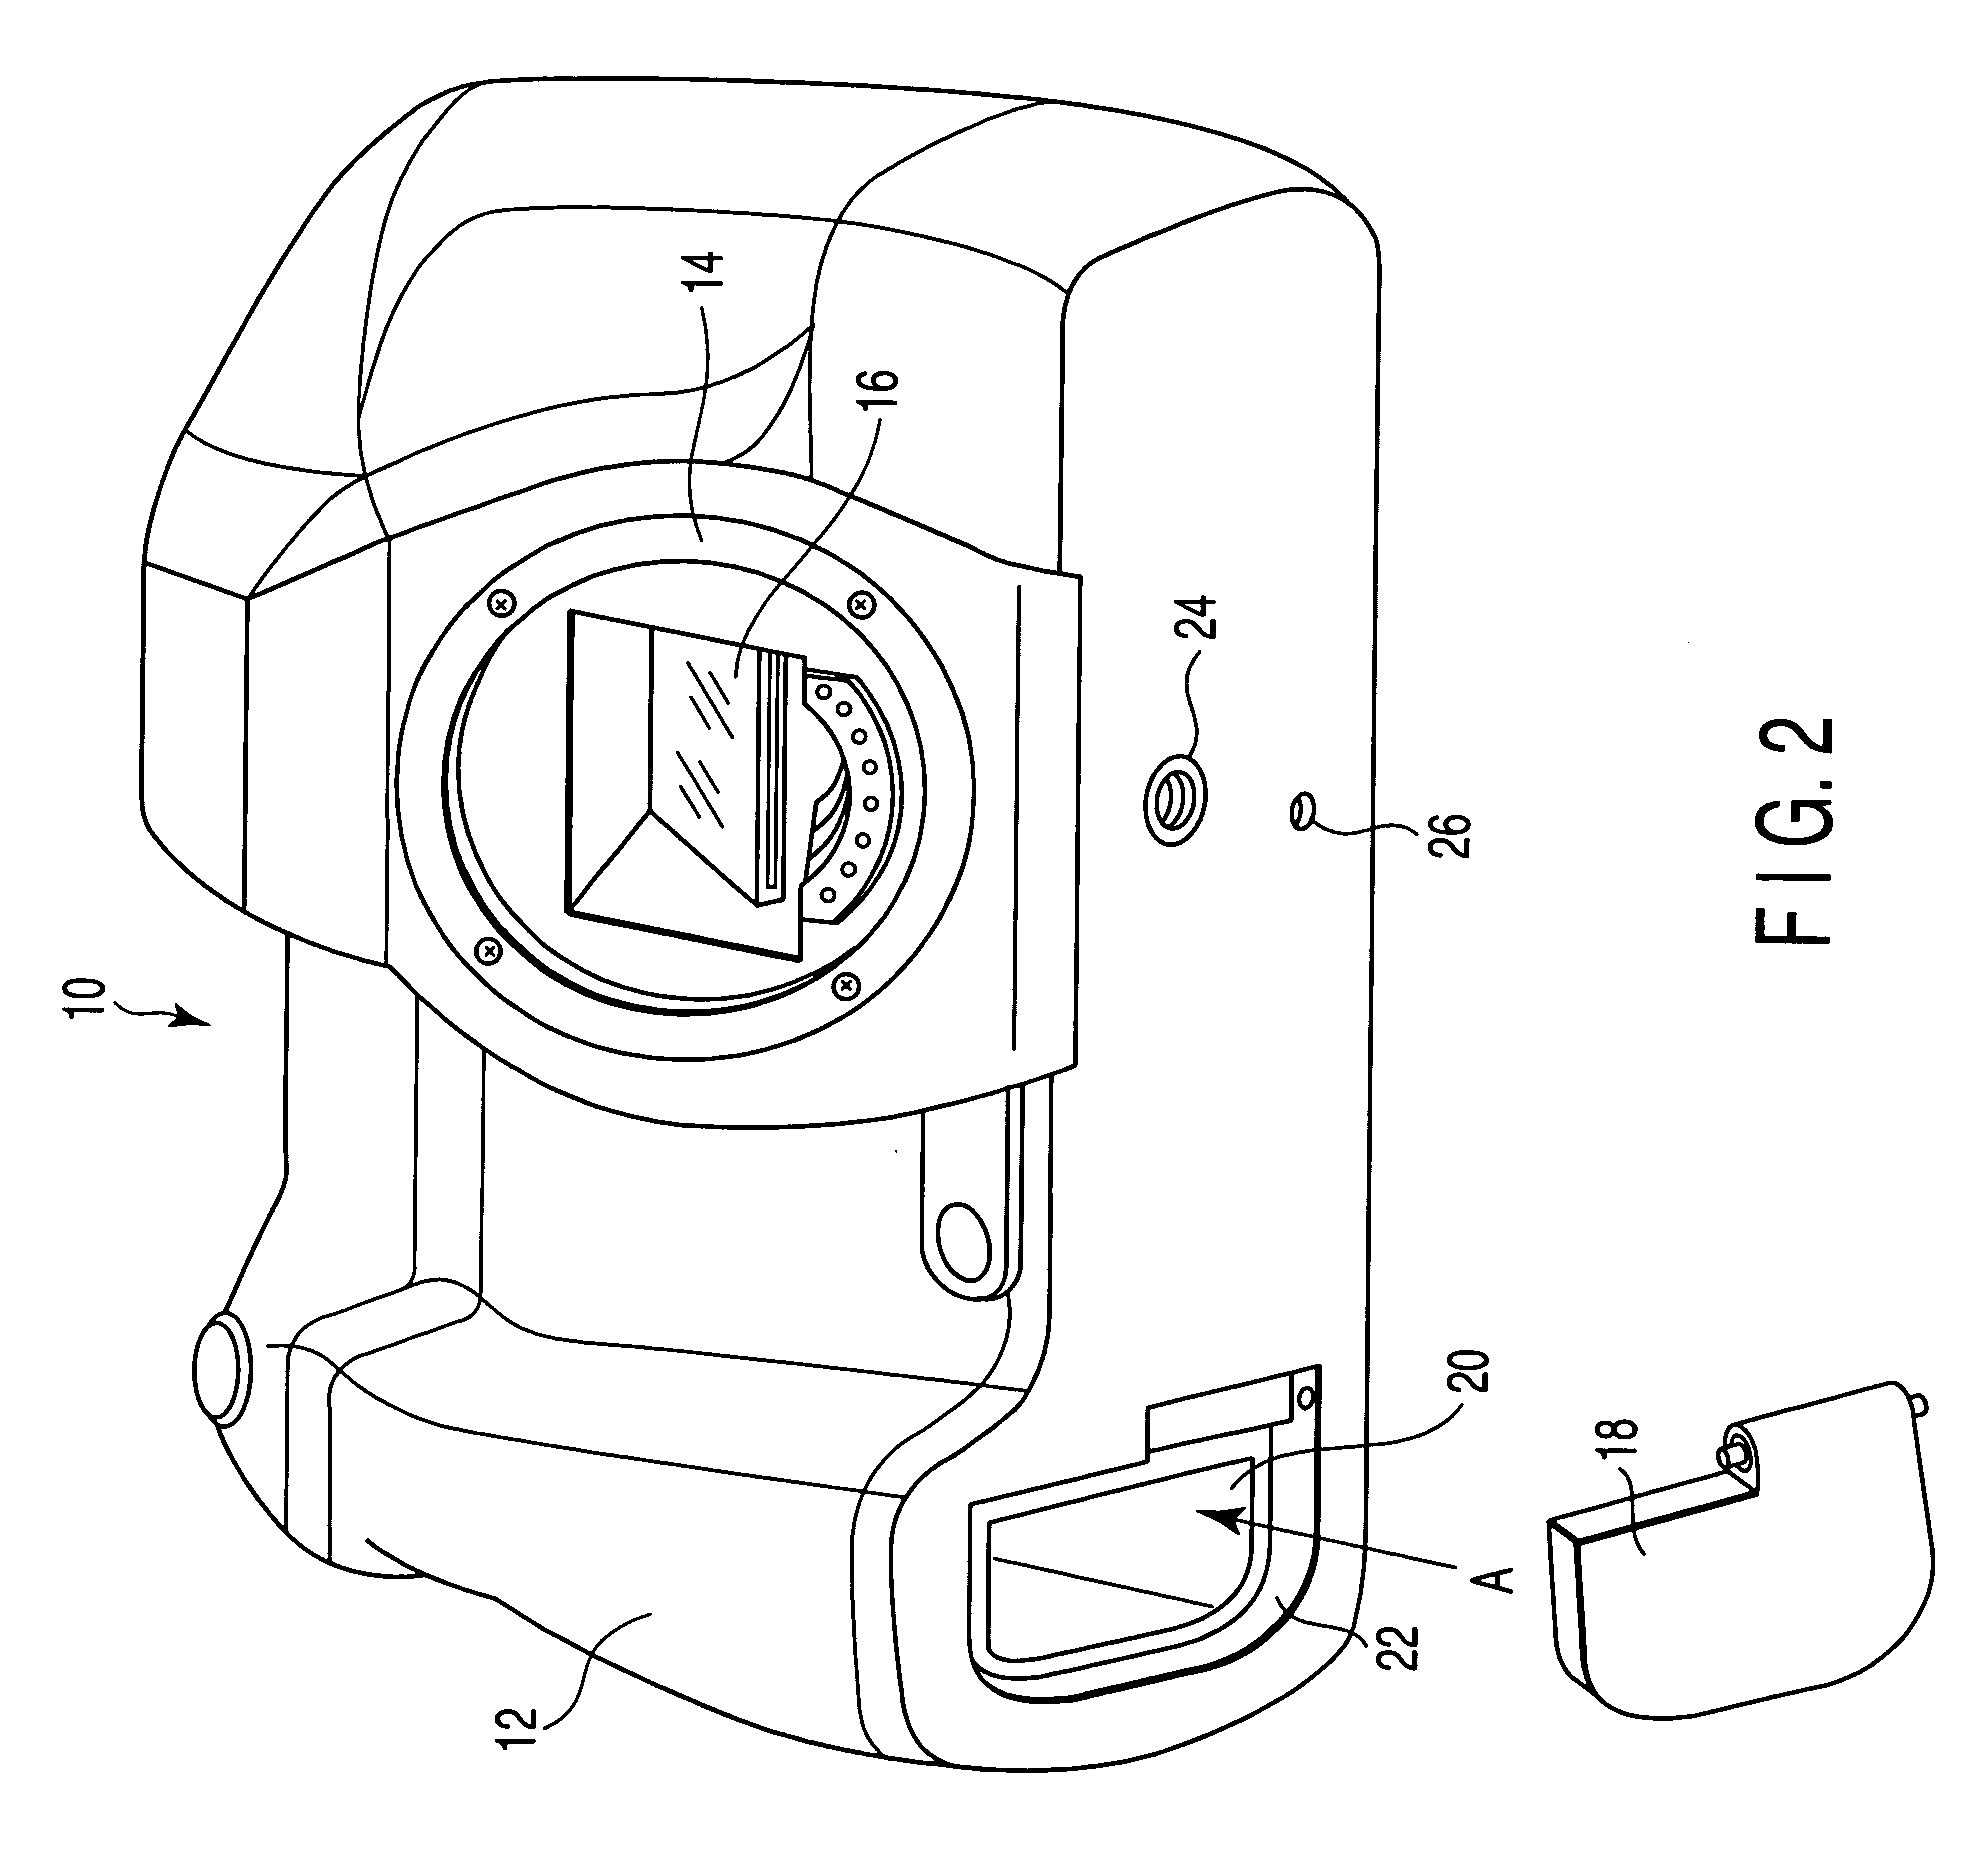 Attachment structure of adapter